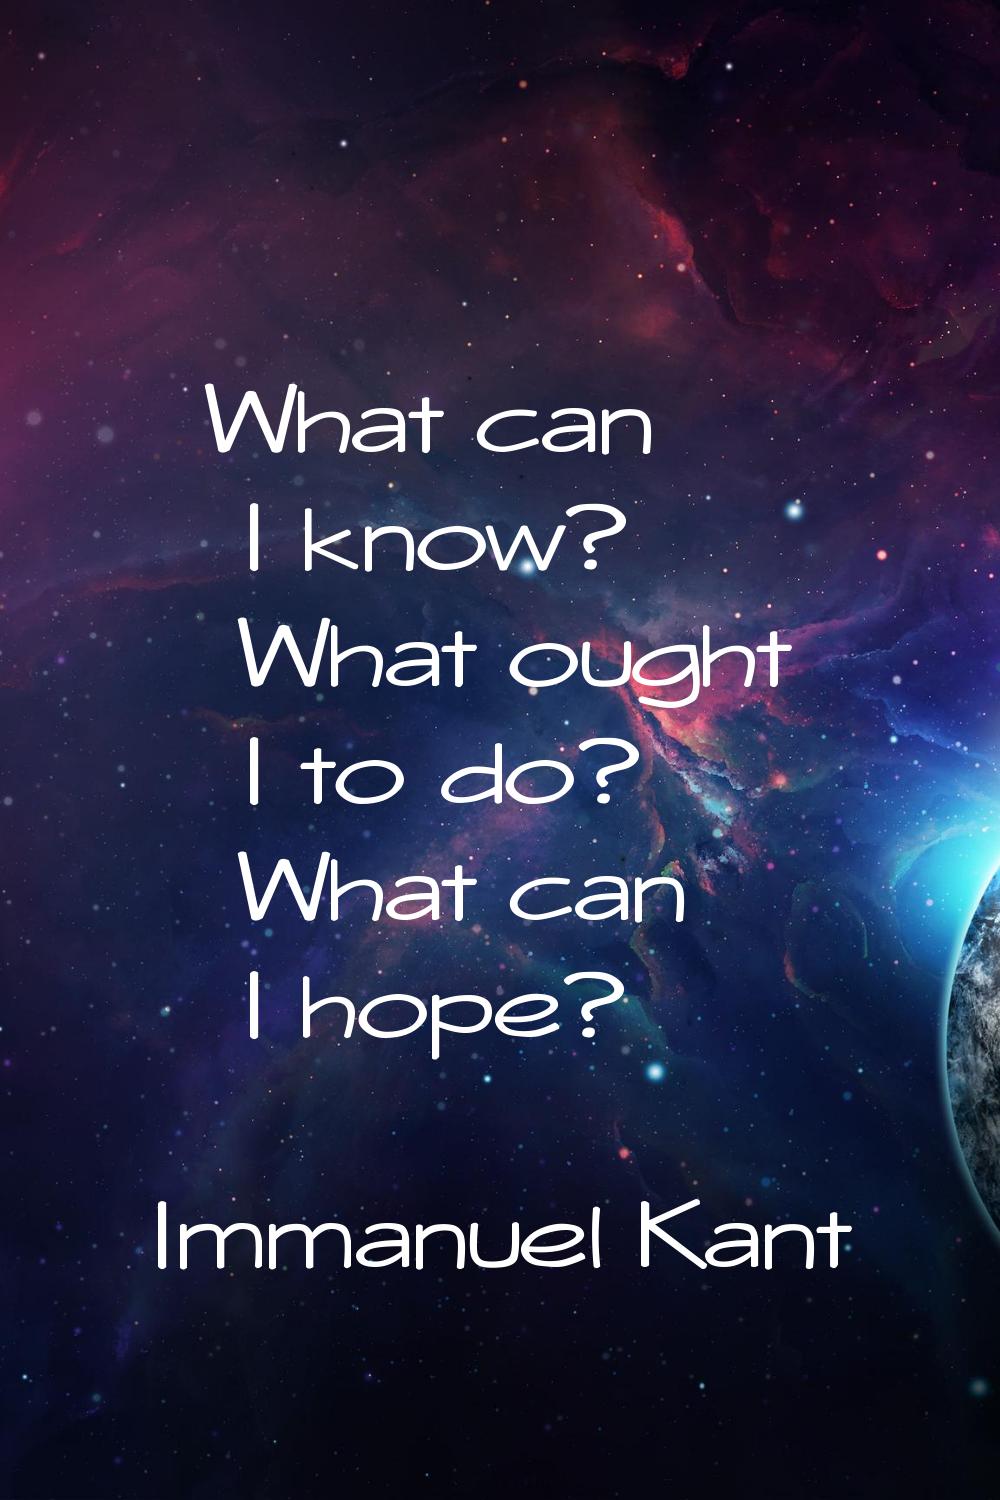 What can I know? What ought I to do? What can I hope?